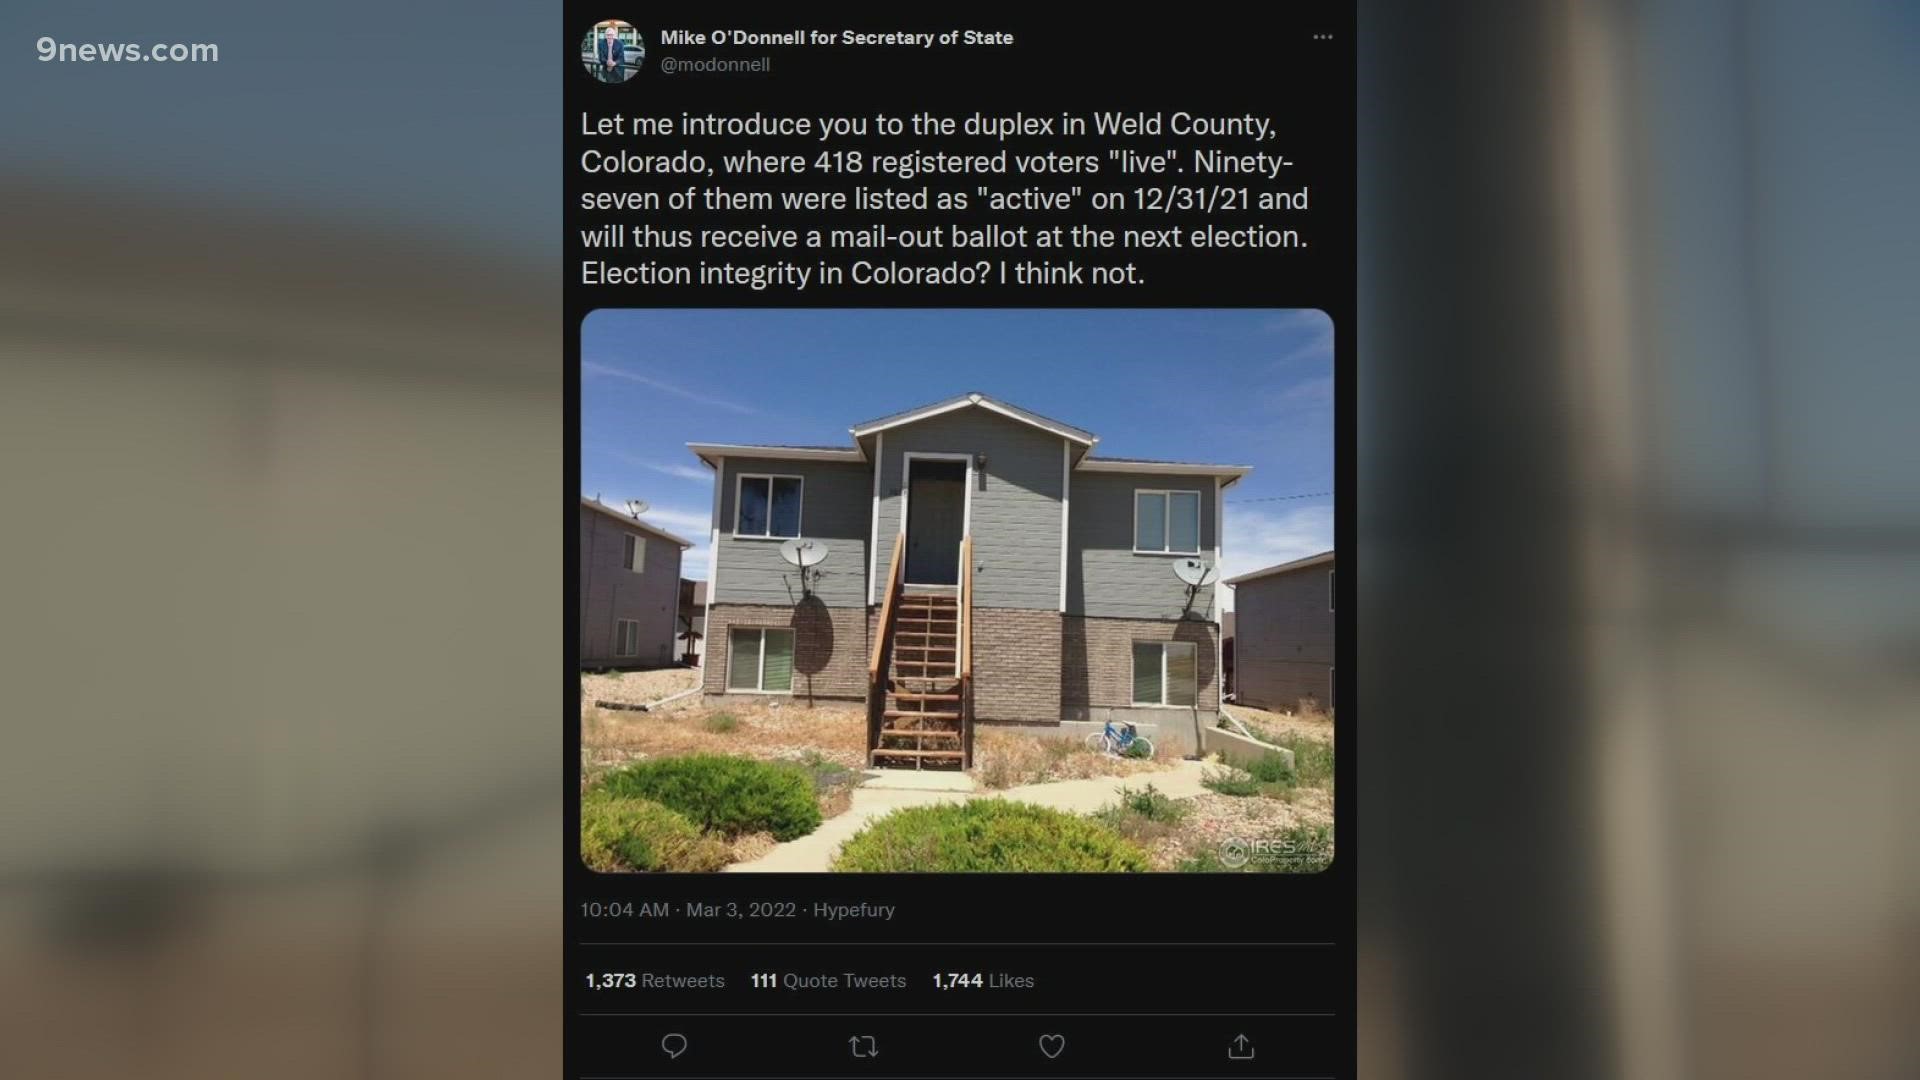 This isn't voter fraud, but a Weld County duplex with hundreds of registered voters is getting attention. It's tied to a truck driving school.